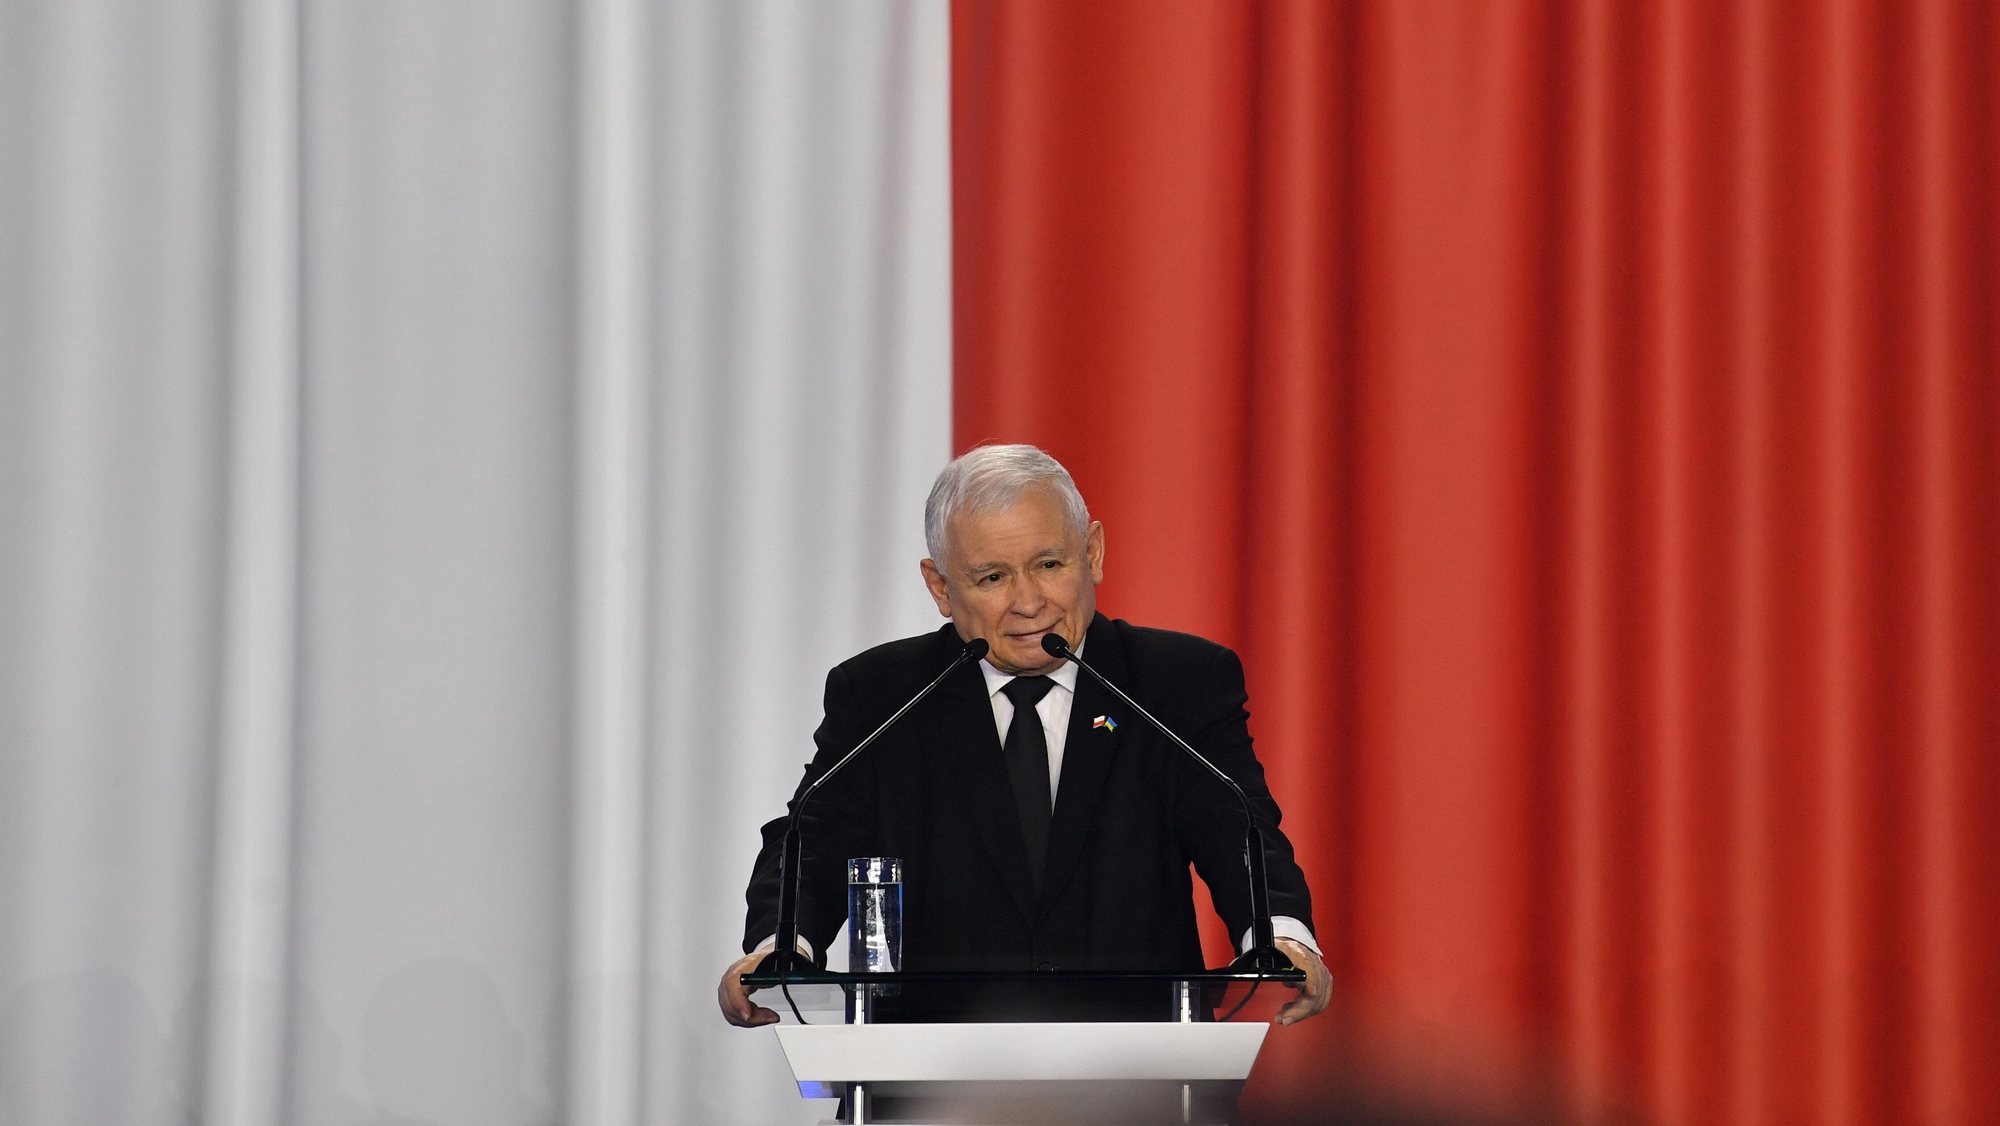 epa09995285 Polish Deputy Prime Minister and leader of the Law and Justice (PiS) ruling party Jaroslaw Kaczynski speaks during the Law and Justice party&#039;s congress at the Education and Recreation Center in Marki, near Warsaw, Poland, 04 June 2022.  EPA/Radek Pietruszka POLAND OUT